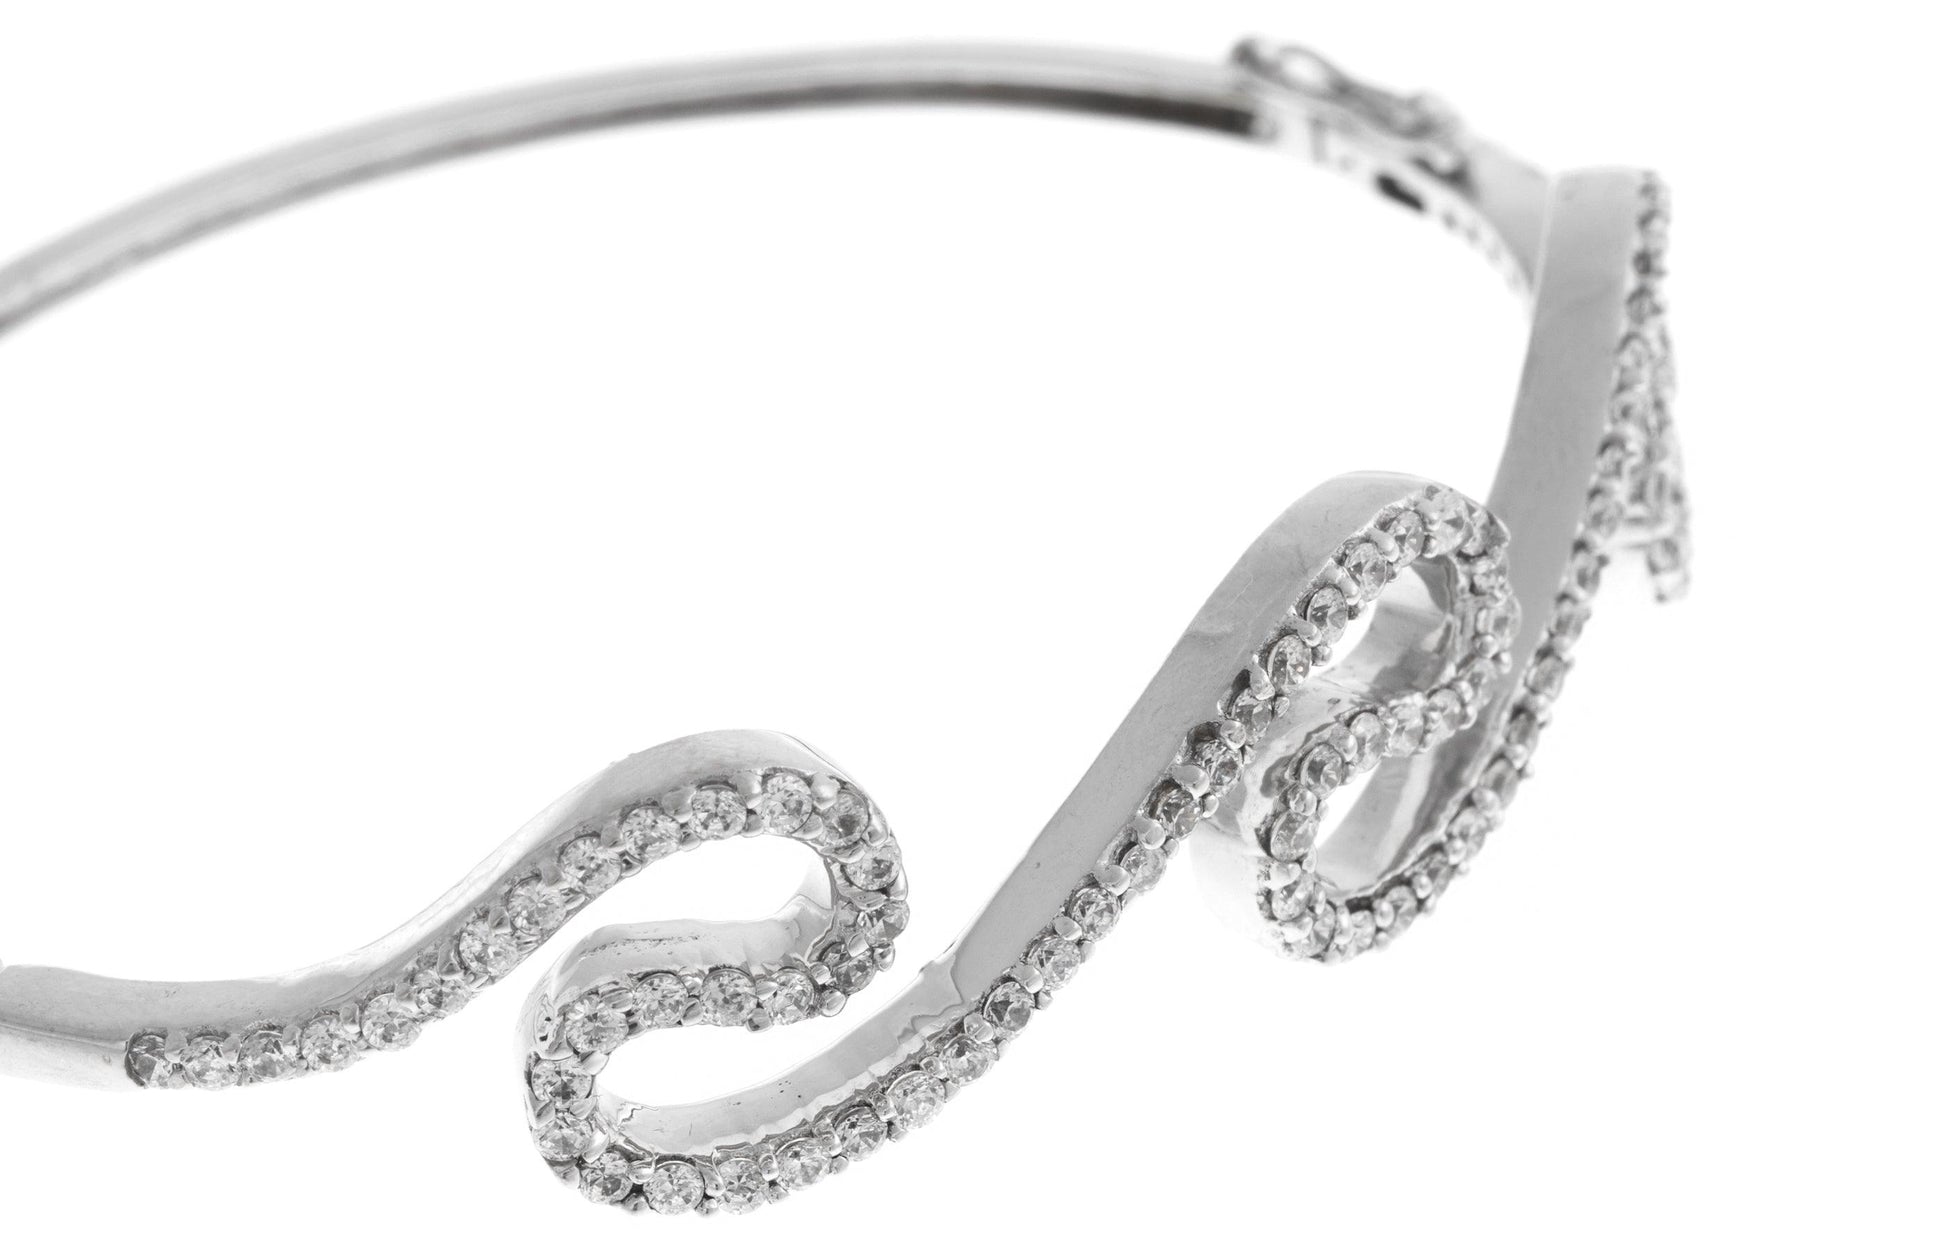 18ct White Gold Bangle with Cubic Zirconia Stones (16.7g) (B-1457) - Minar Jewellers